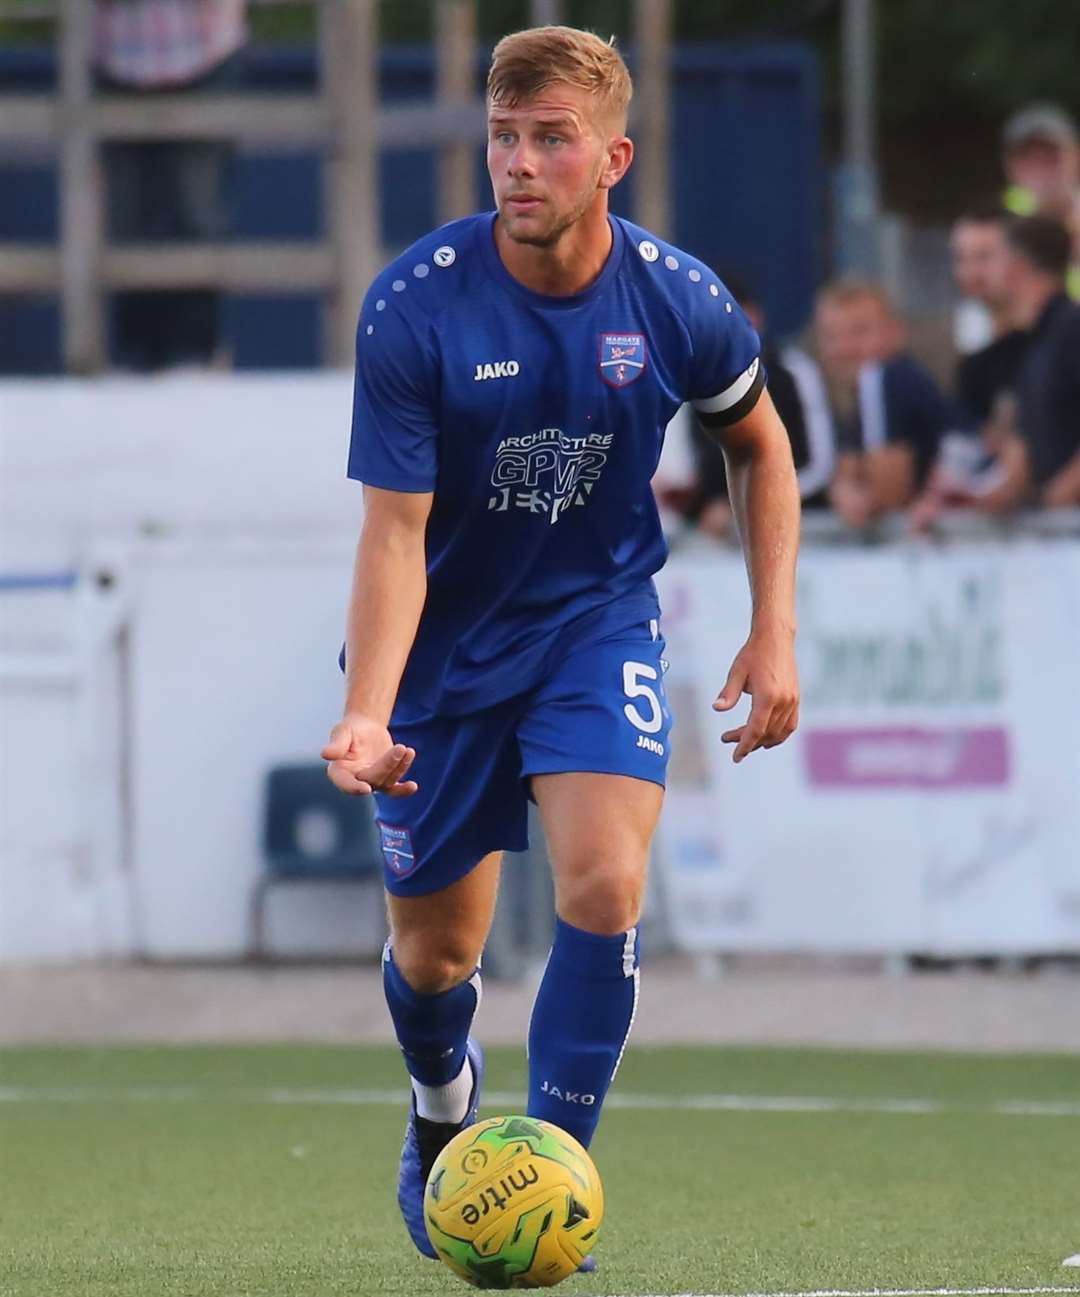 Margate's Ben Swift scored his side's first goal in their 4-2 win over Haringey on Saturday